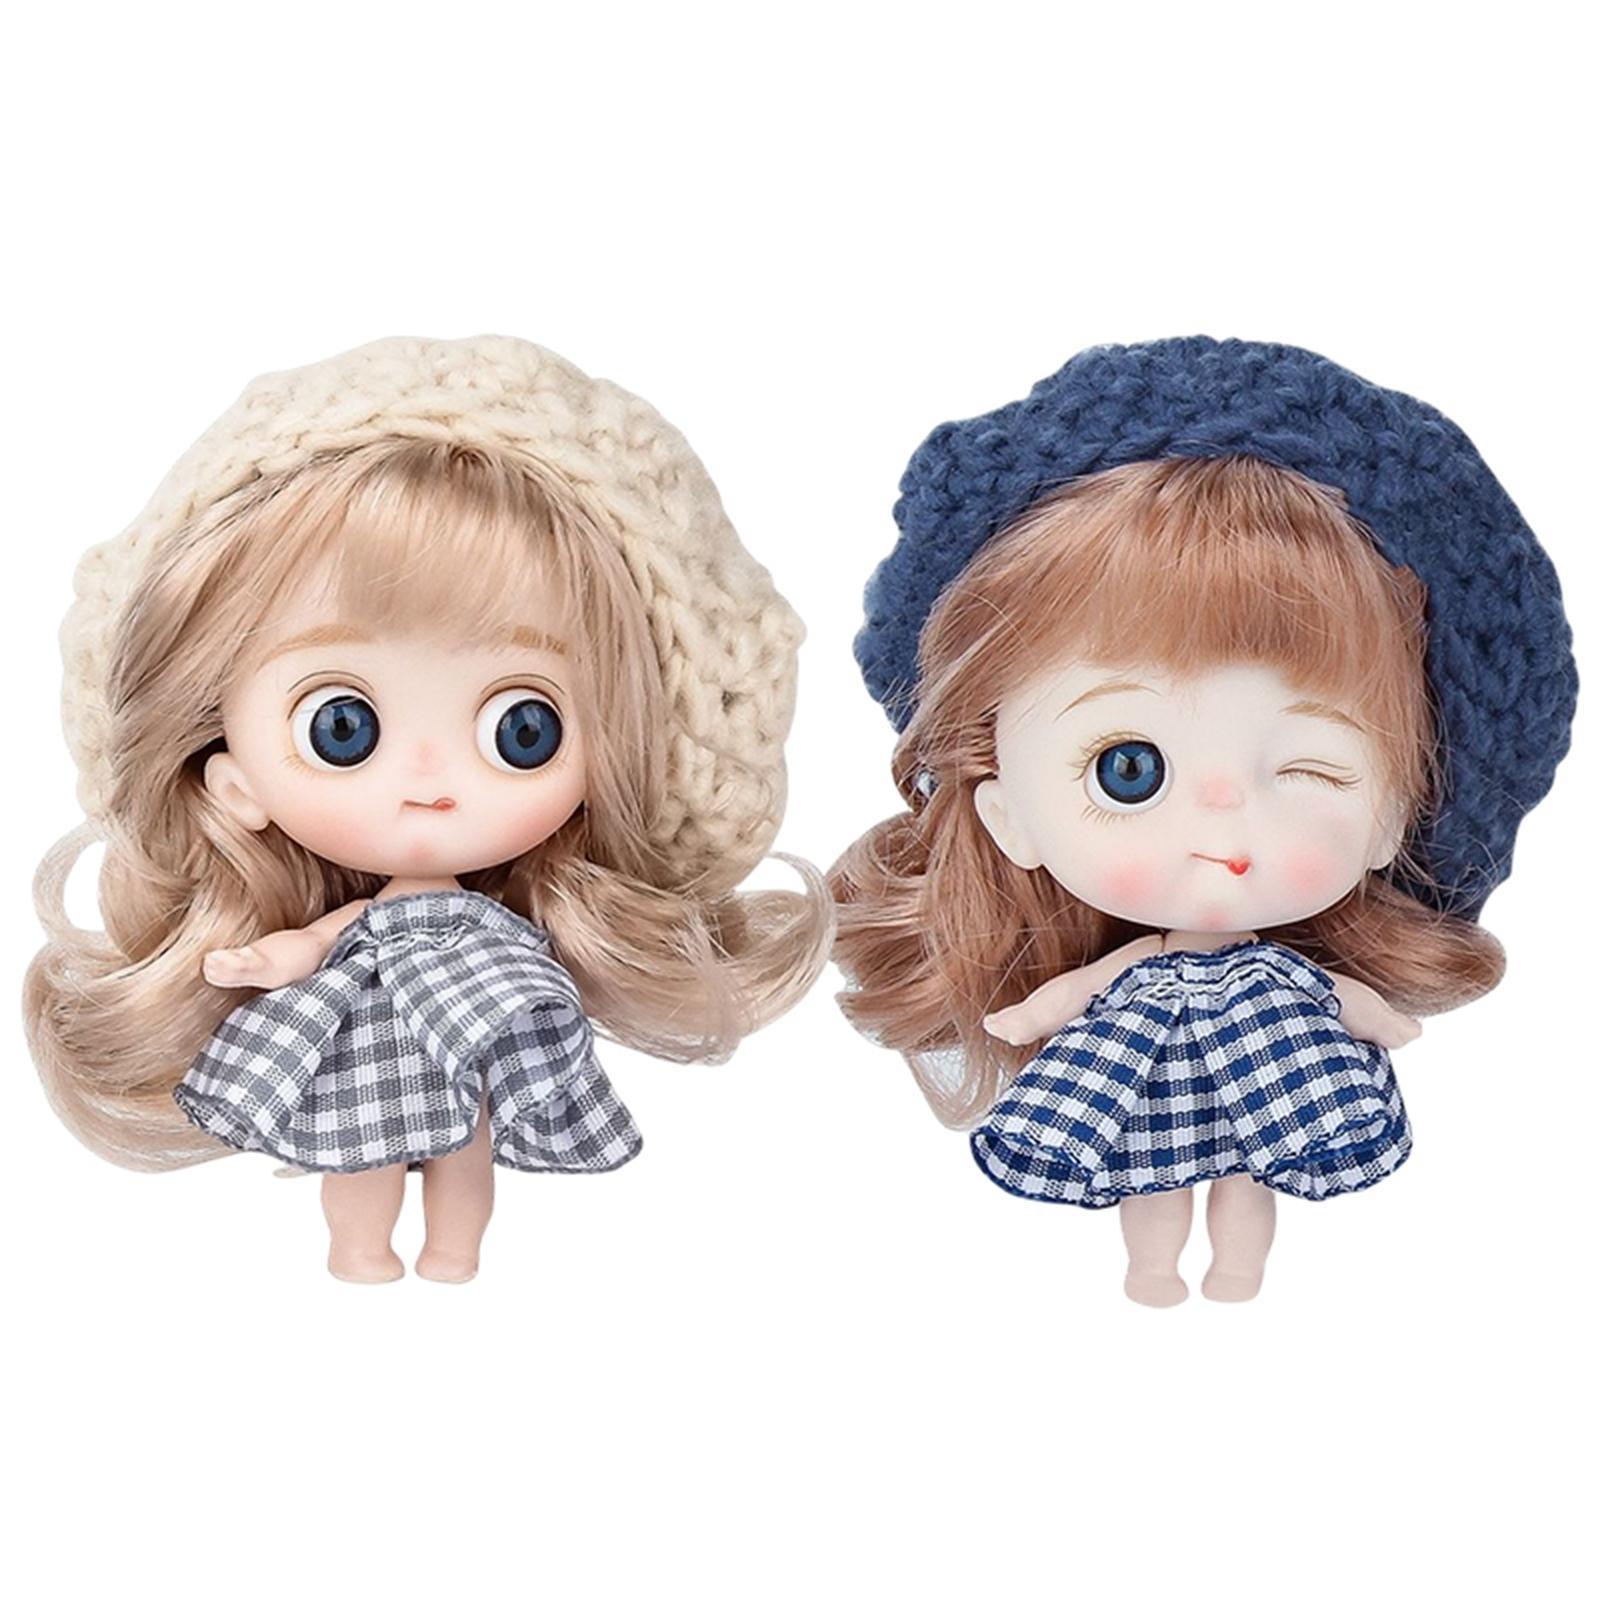 10cm 1:12 BJD Girl Doll with Dress 3D Eyes Cute Makeup for Girl Gifts Toy